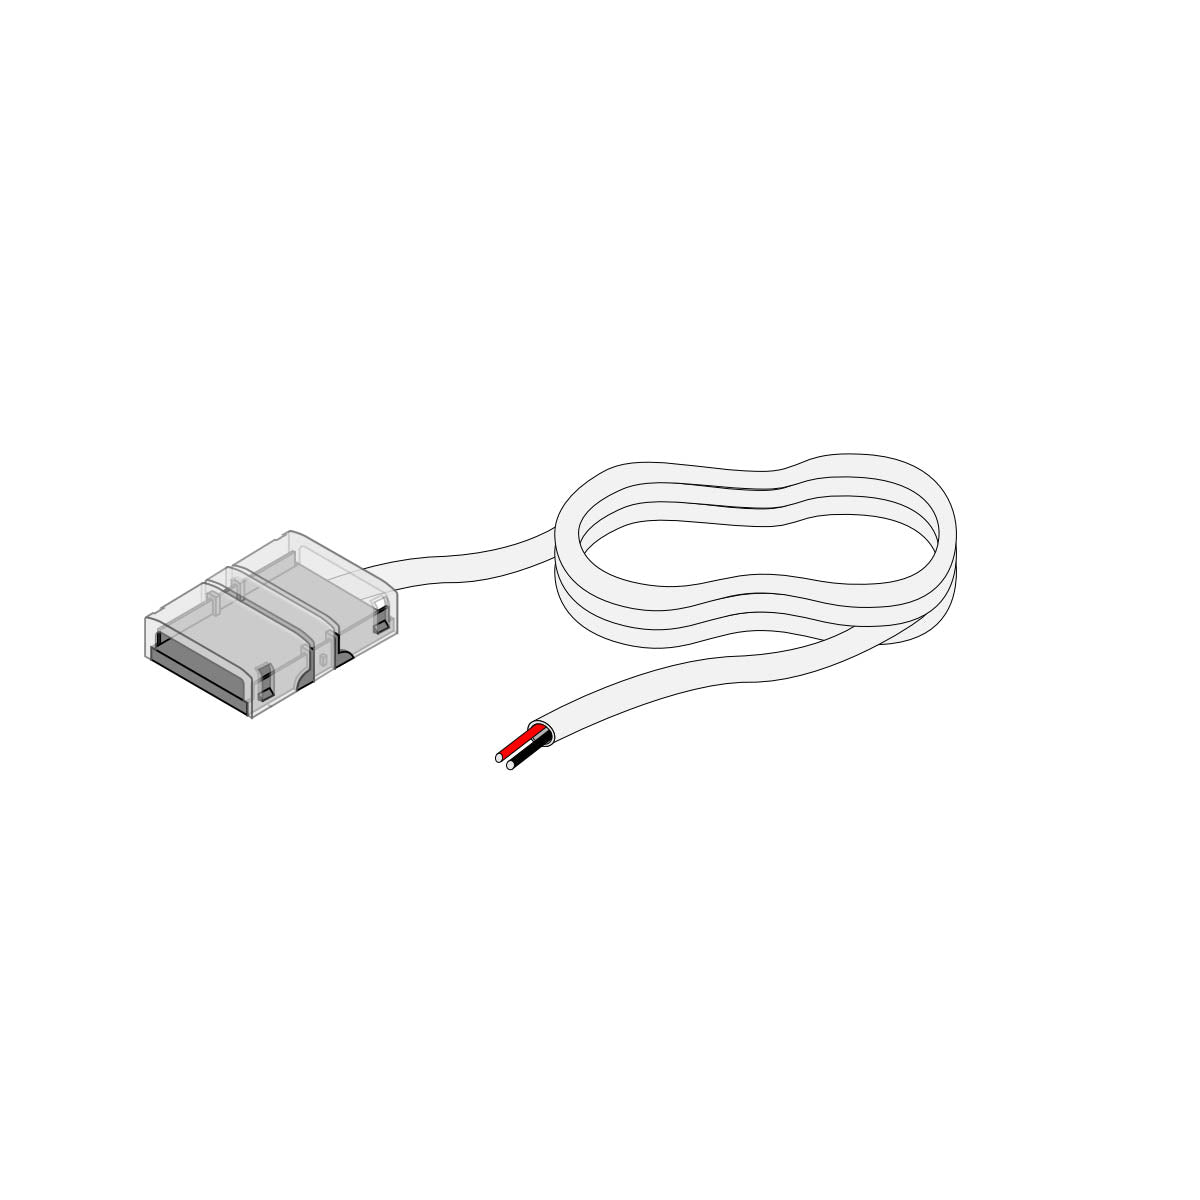 24in. Tape to Wire Splice Connector for Streamlite Tape Lights